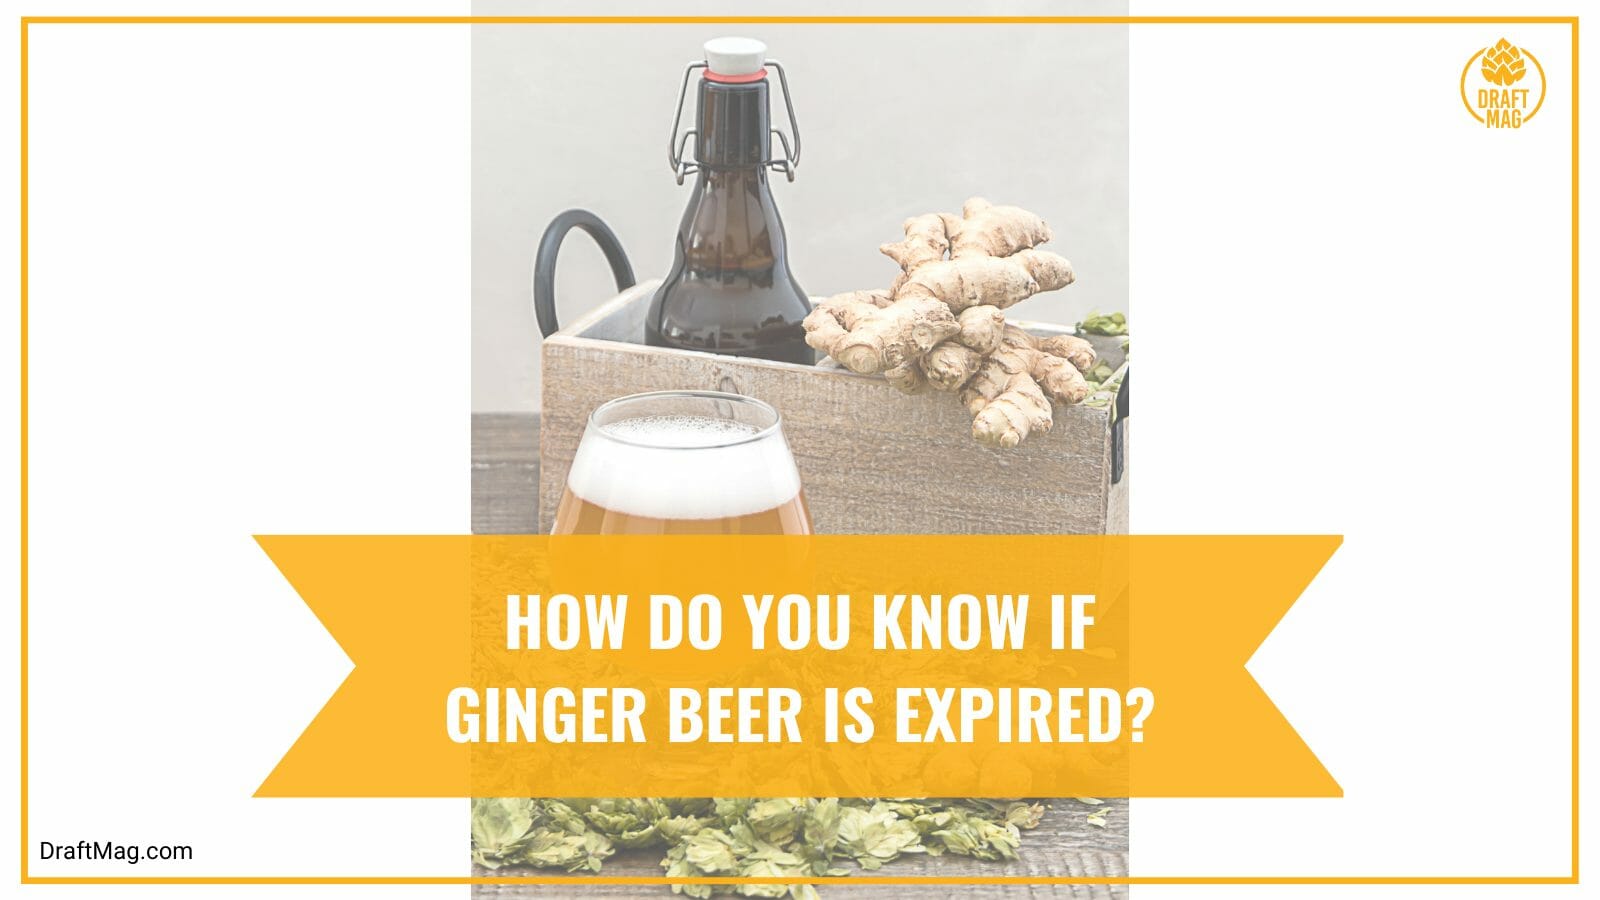 How to know if ginger beer expired